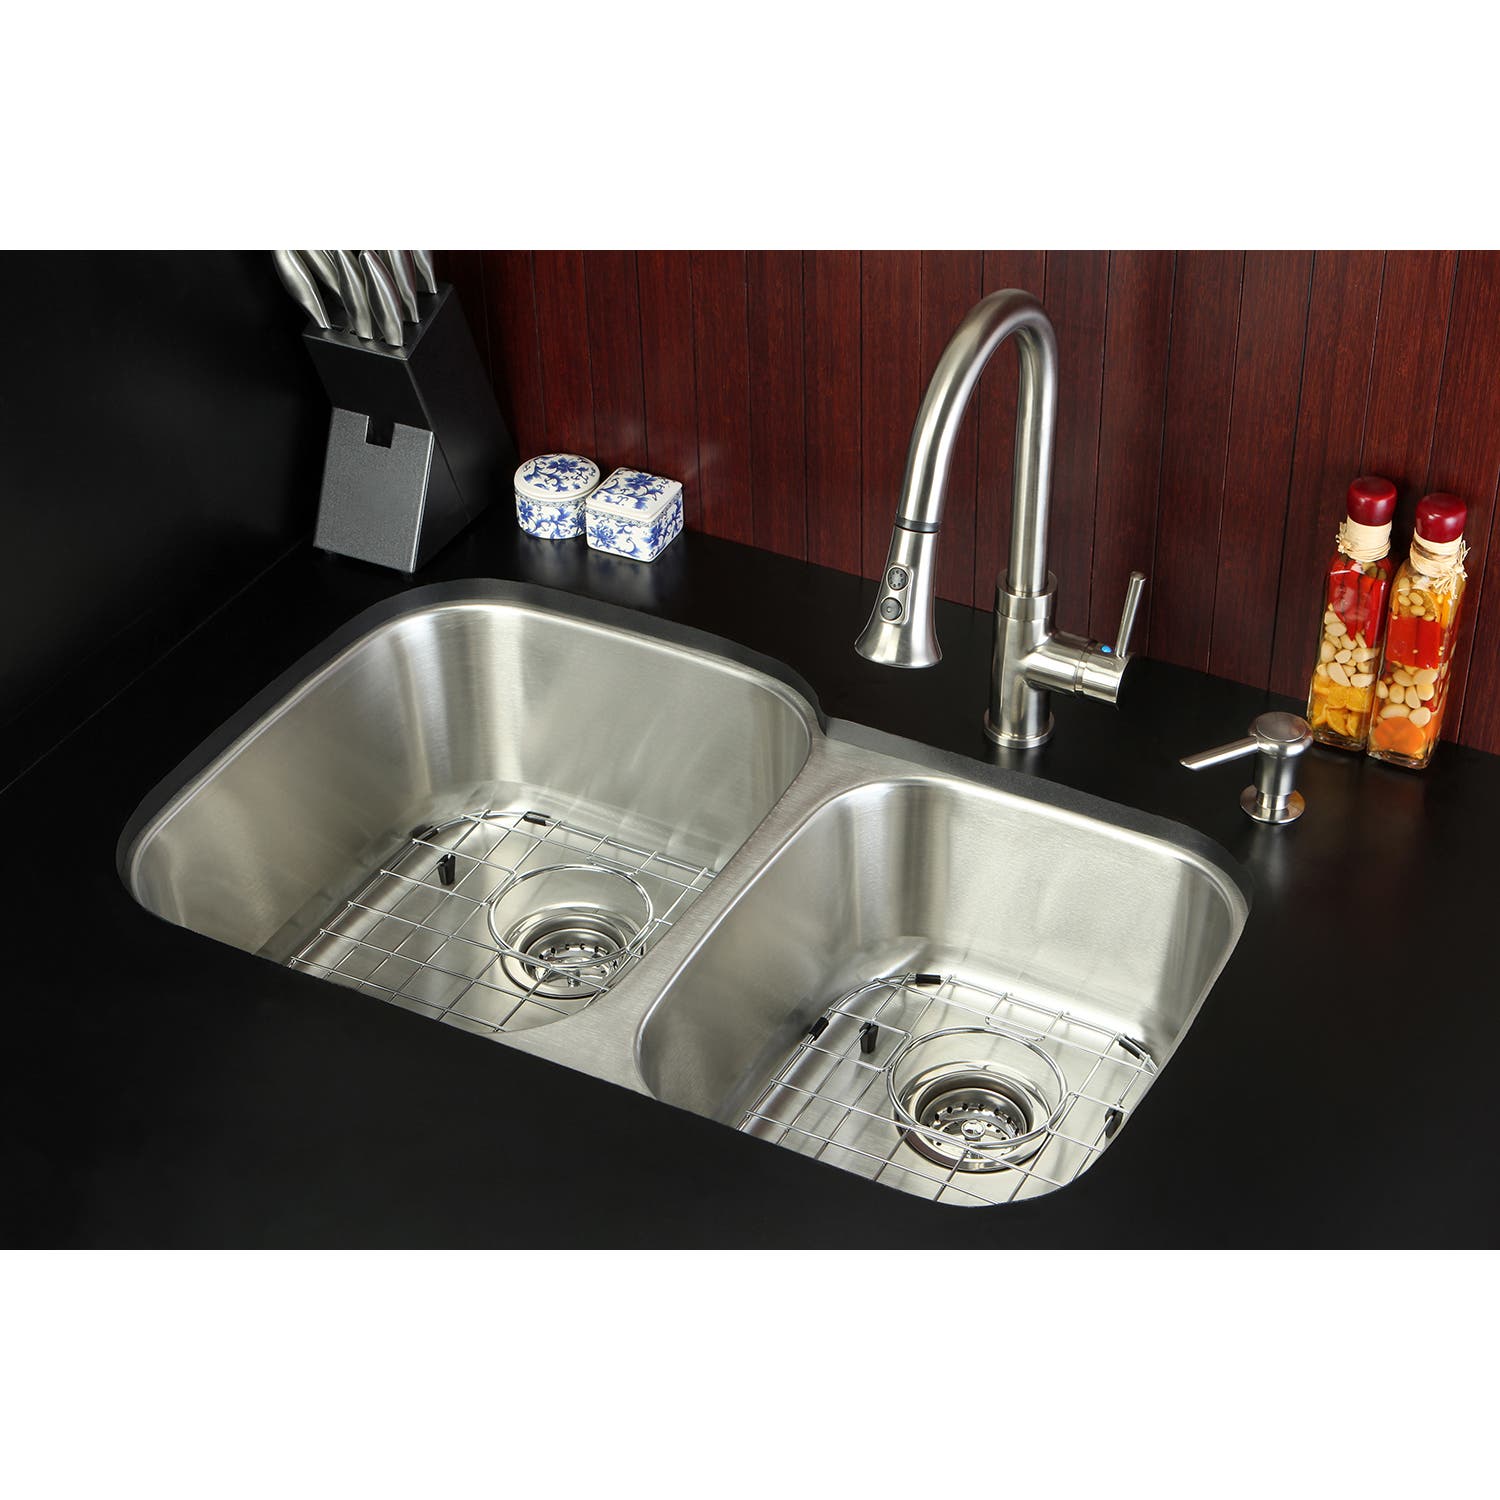 Make Dish-Washing Easy with the Stainless Steel Double-Bowl Kitchen Sink and Faucet Combo, KZGKUD3211F